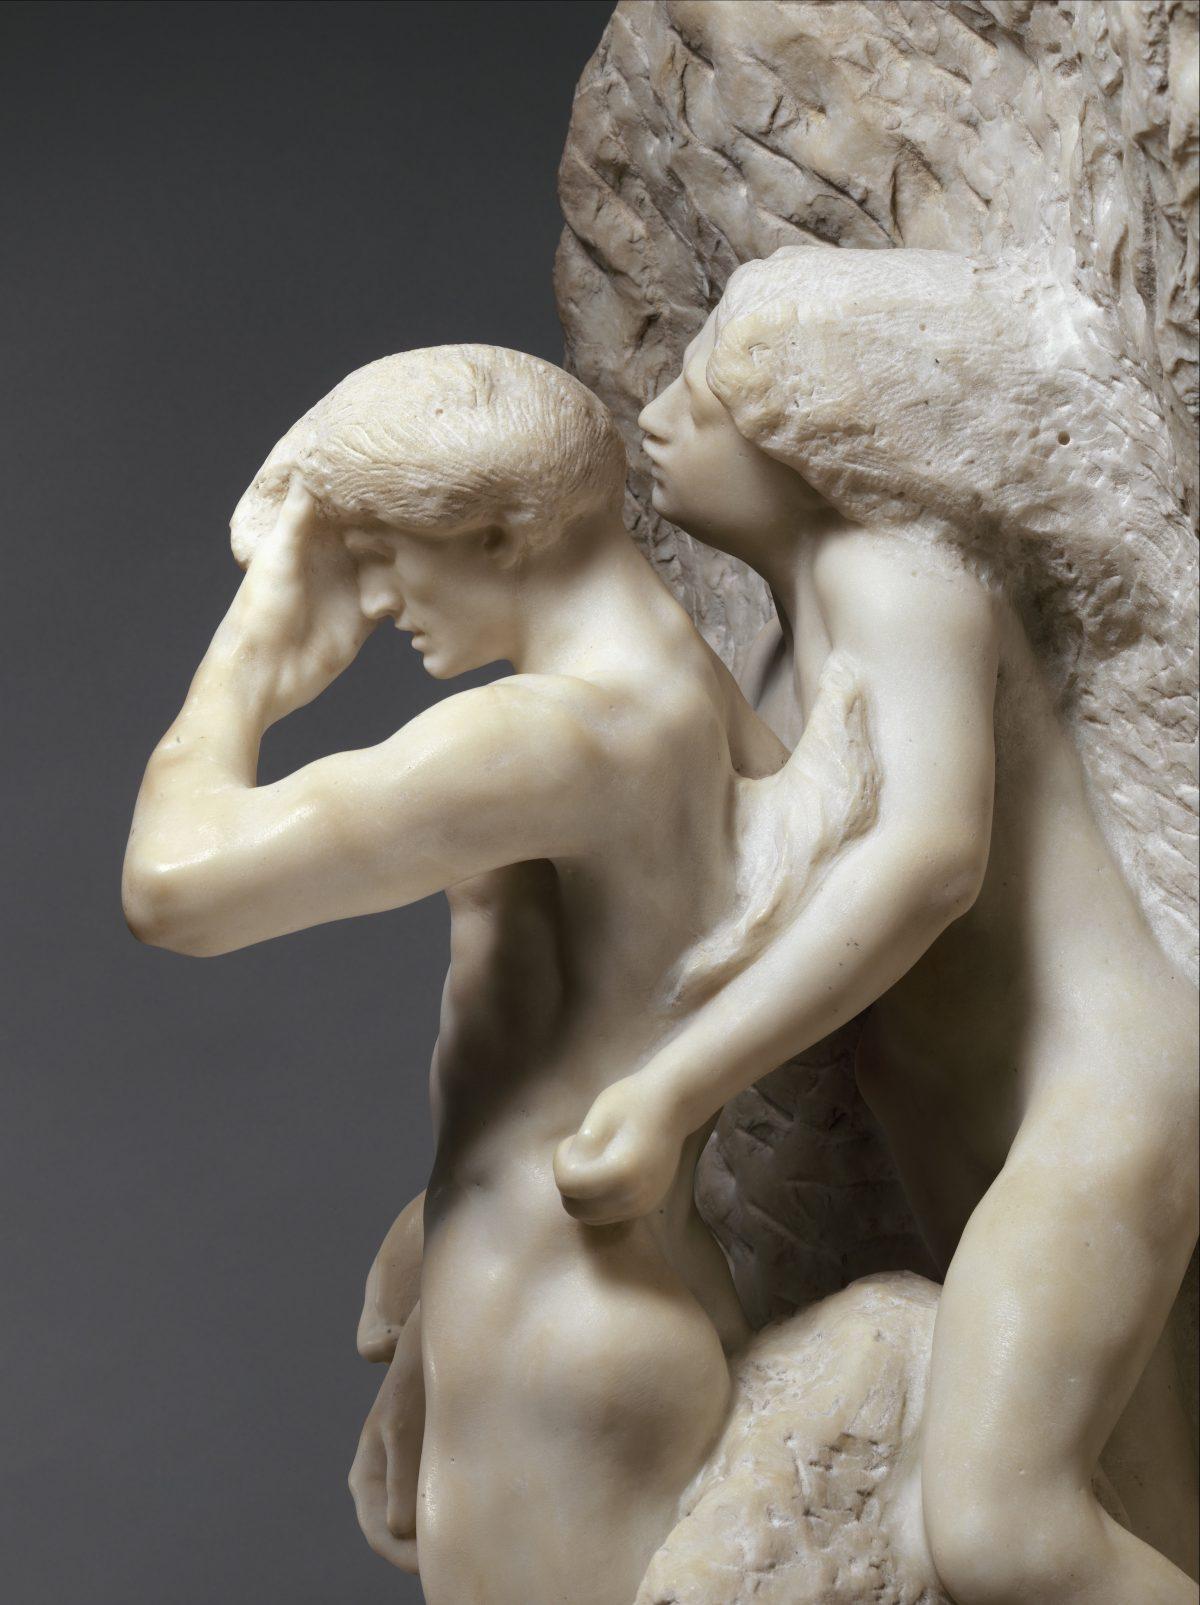 “Orpheus and Eurydice” by Auguste Rodin. Likely modeled before 1887, marble carved 1893. The Metropolitan Museum of Art, gift of Thomas F. Ryan, 1910. (The Metropolitan Museum of Art)